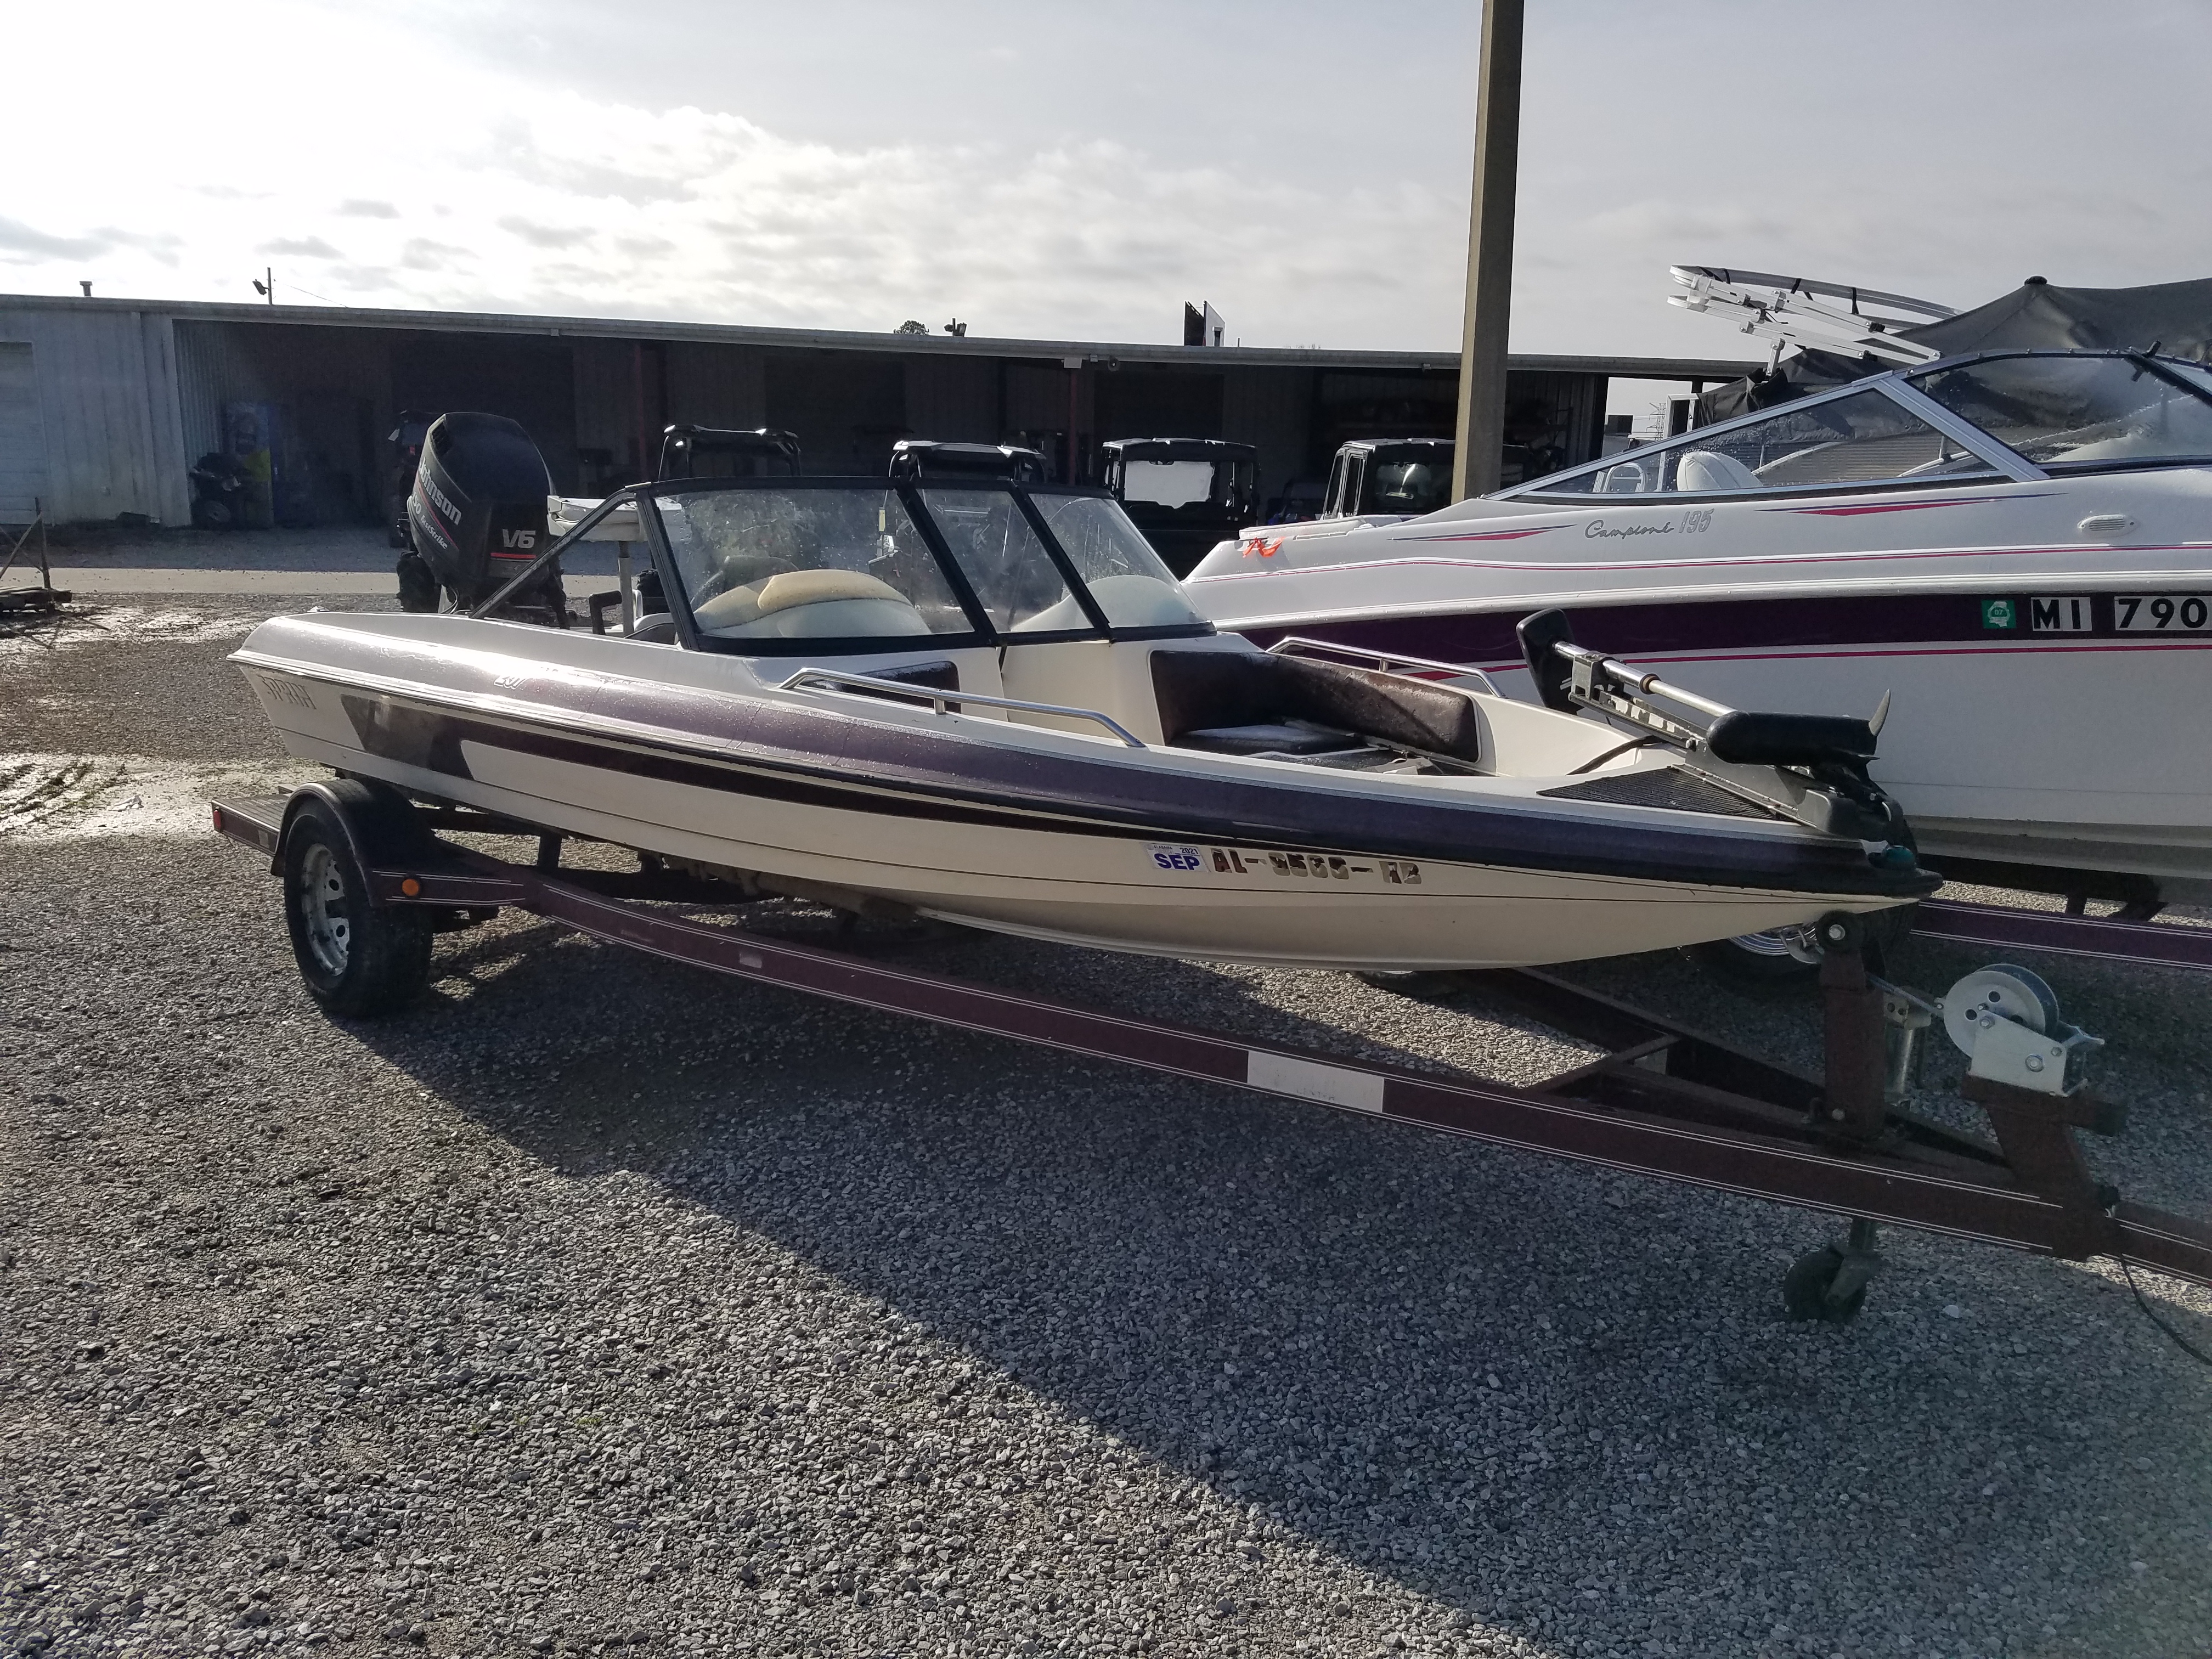 1998 SPRINT BOAT 287FS at Shoals Outdoor Sports